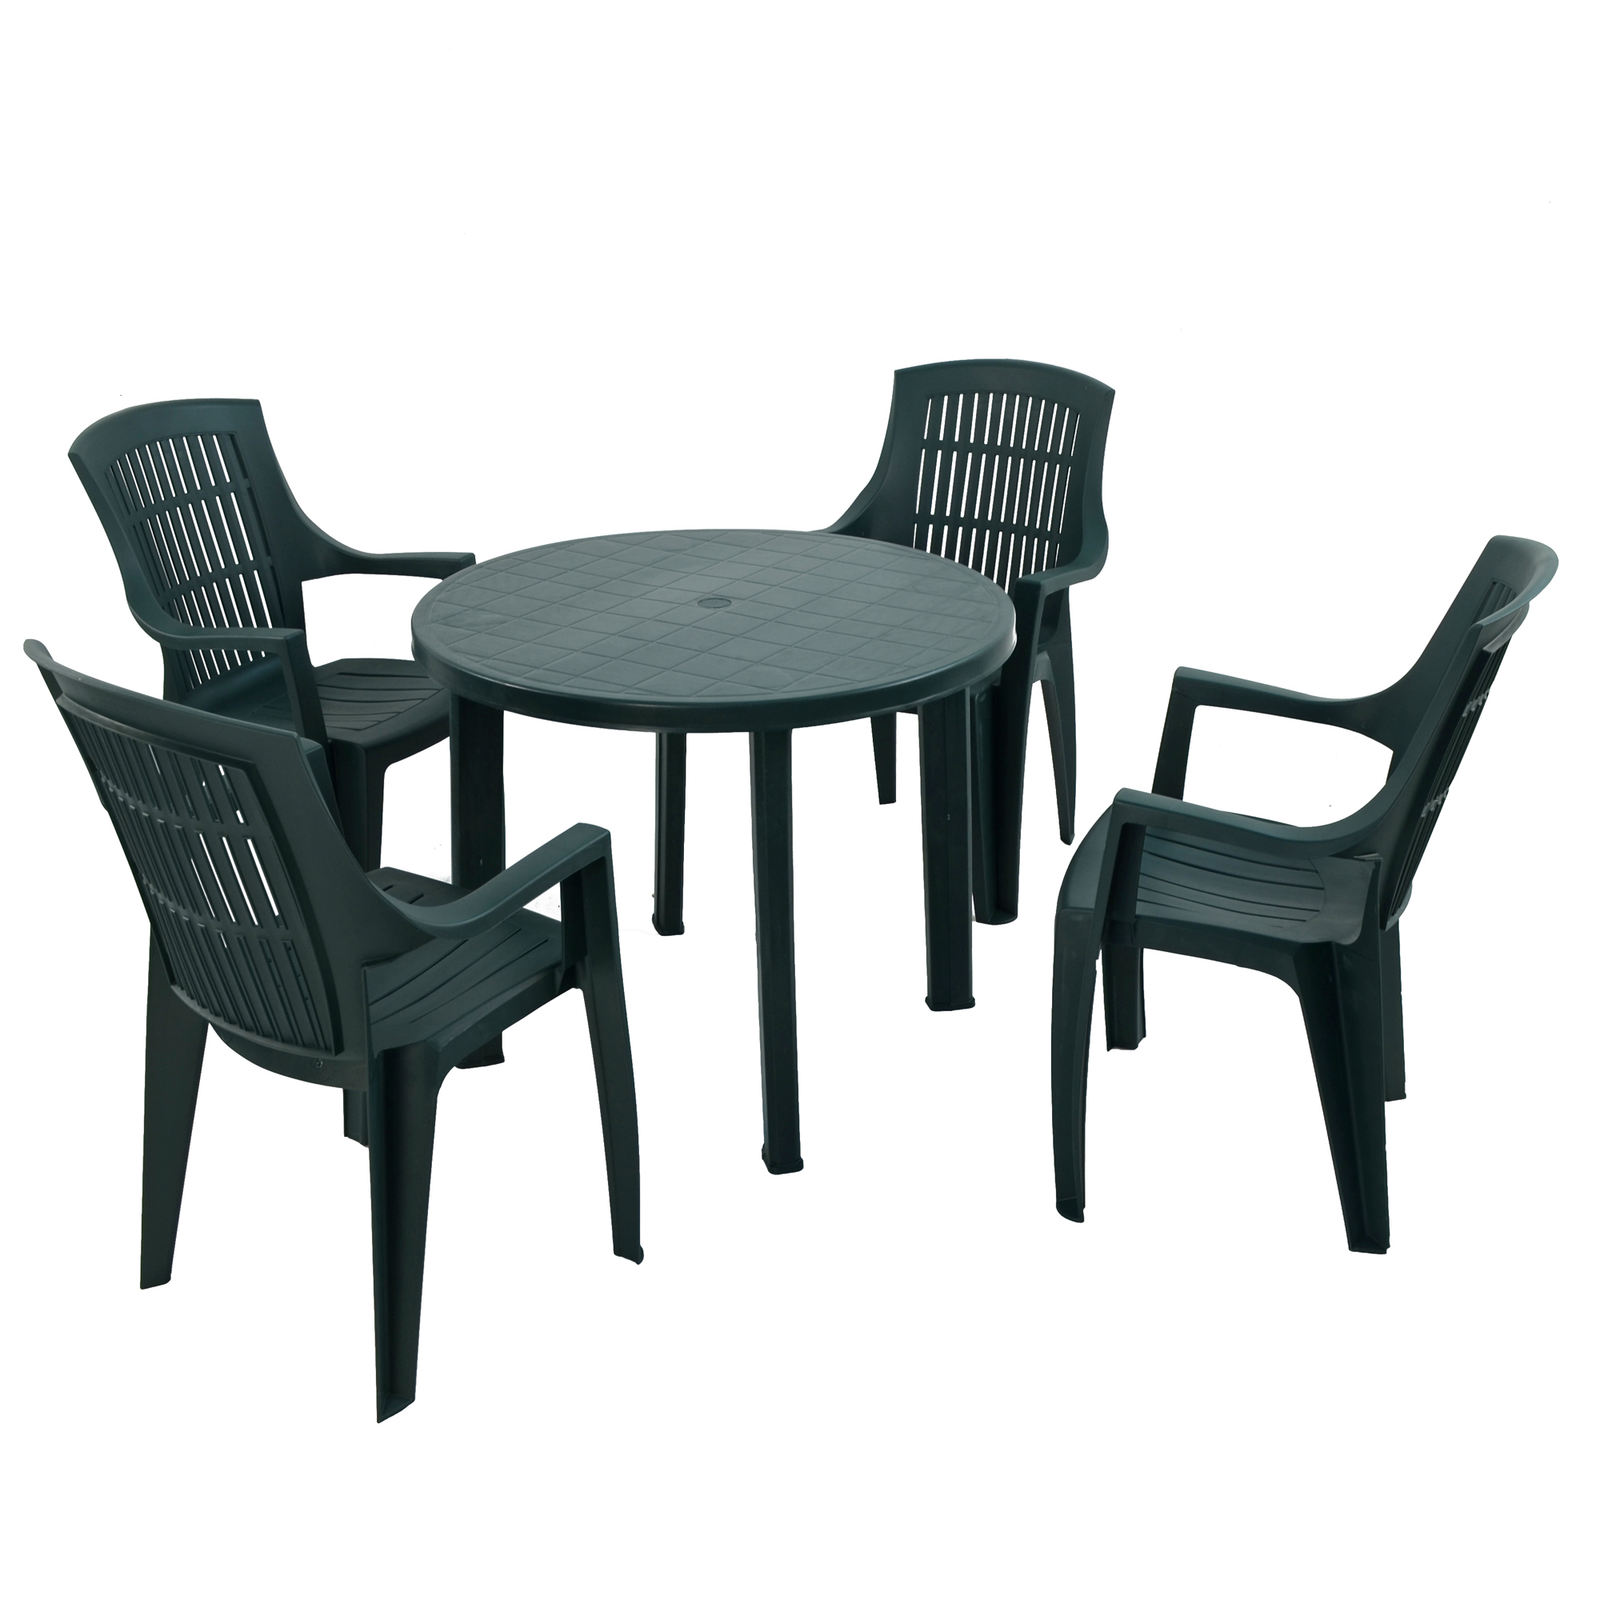 Trabella Revello Round Table With 4 Parma Chairs Set Green Dining Sets Trabella Default Title  